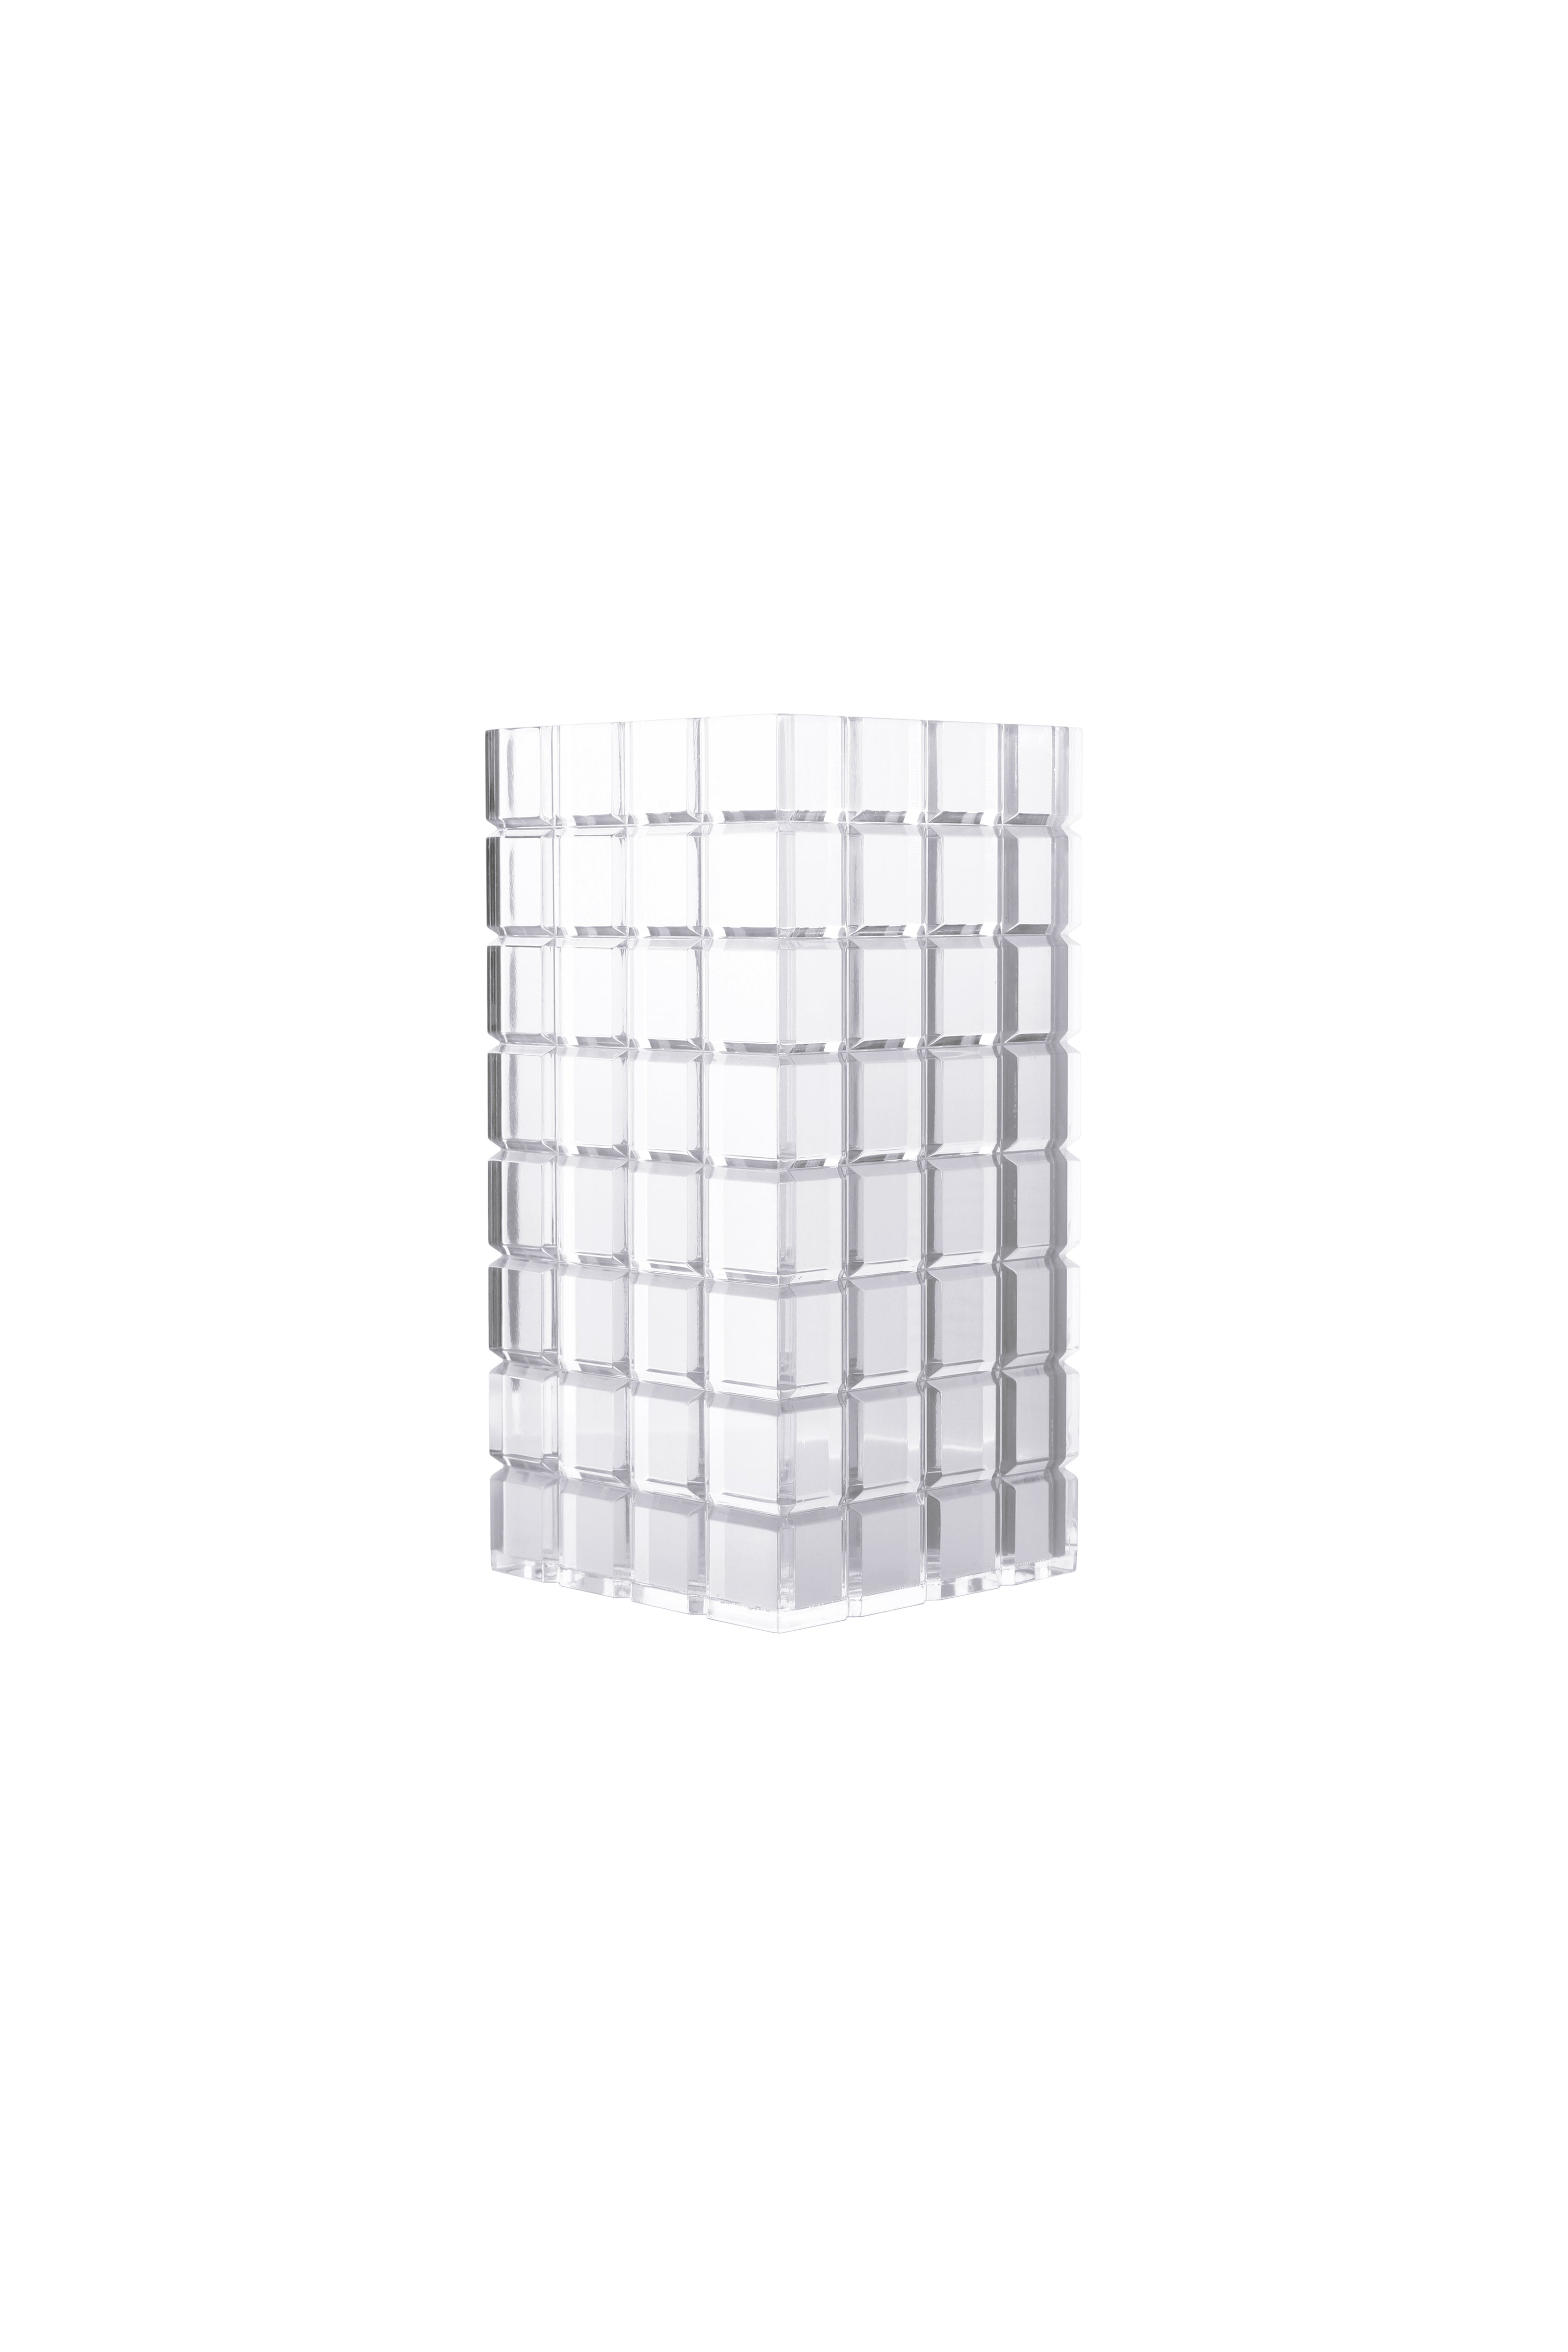 The LOU LOU vase in Silver mirror